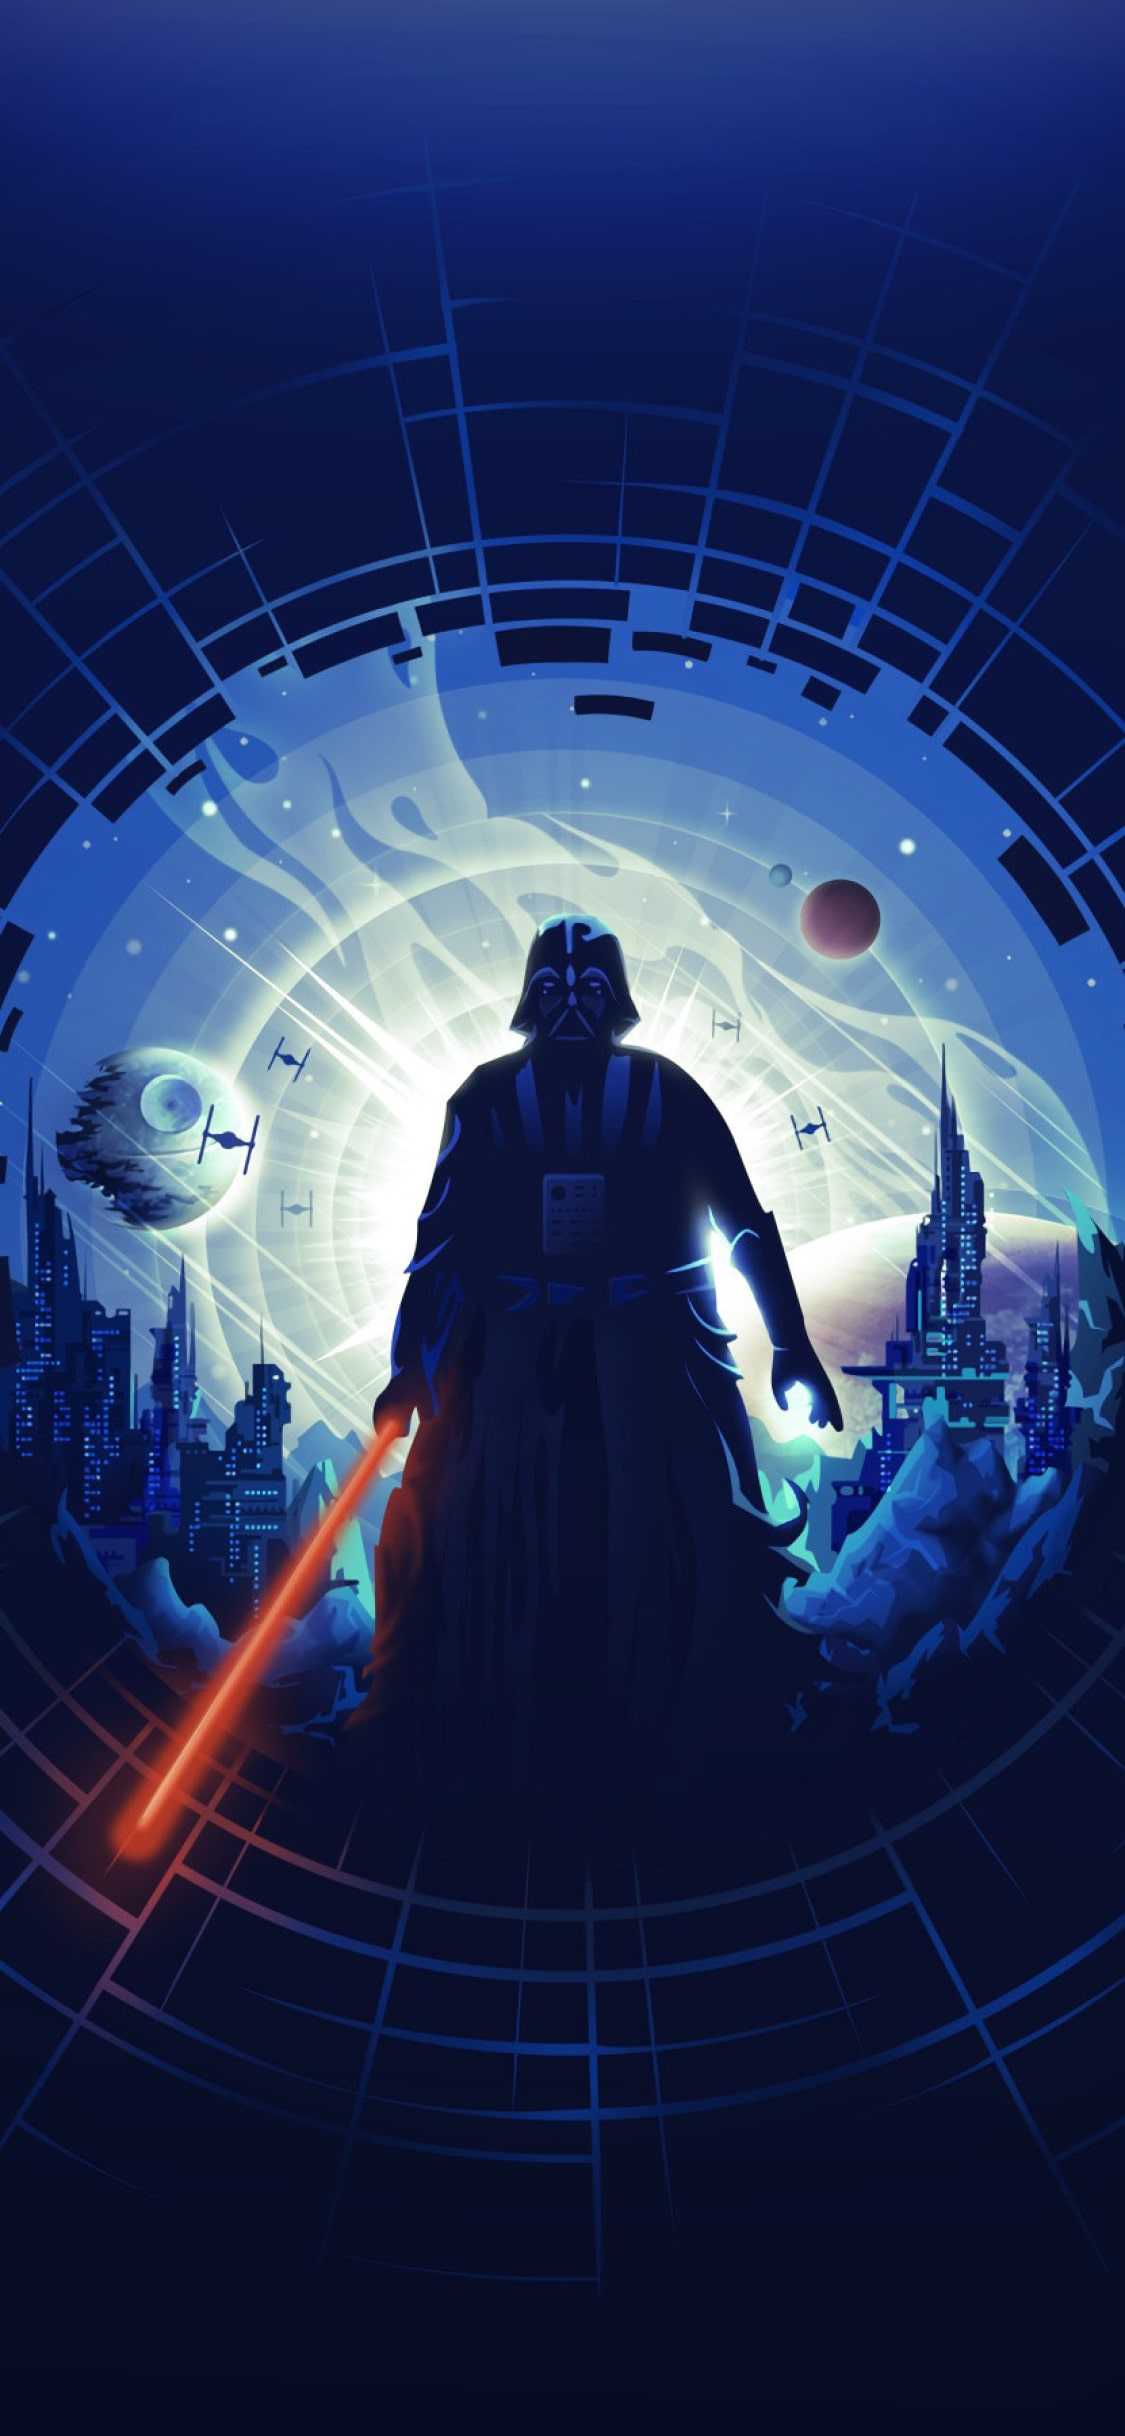 Star Wars Home Screen Wallpapers